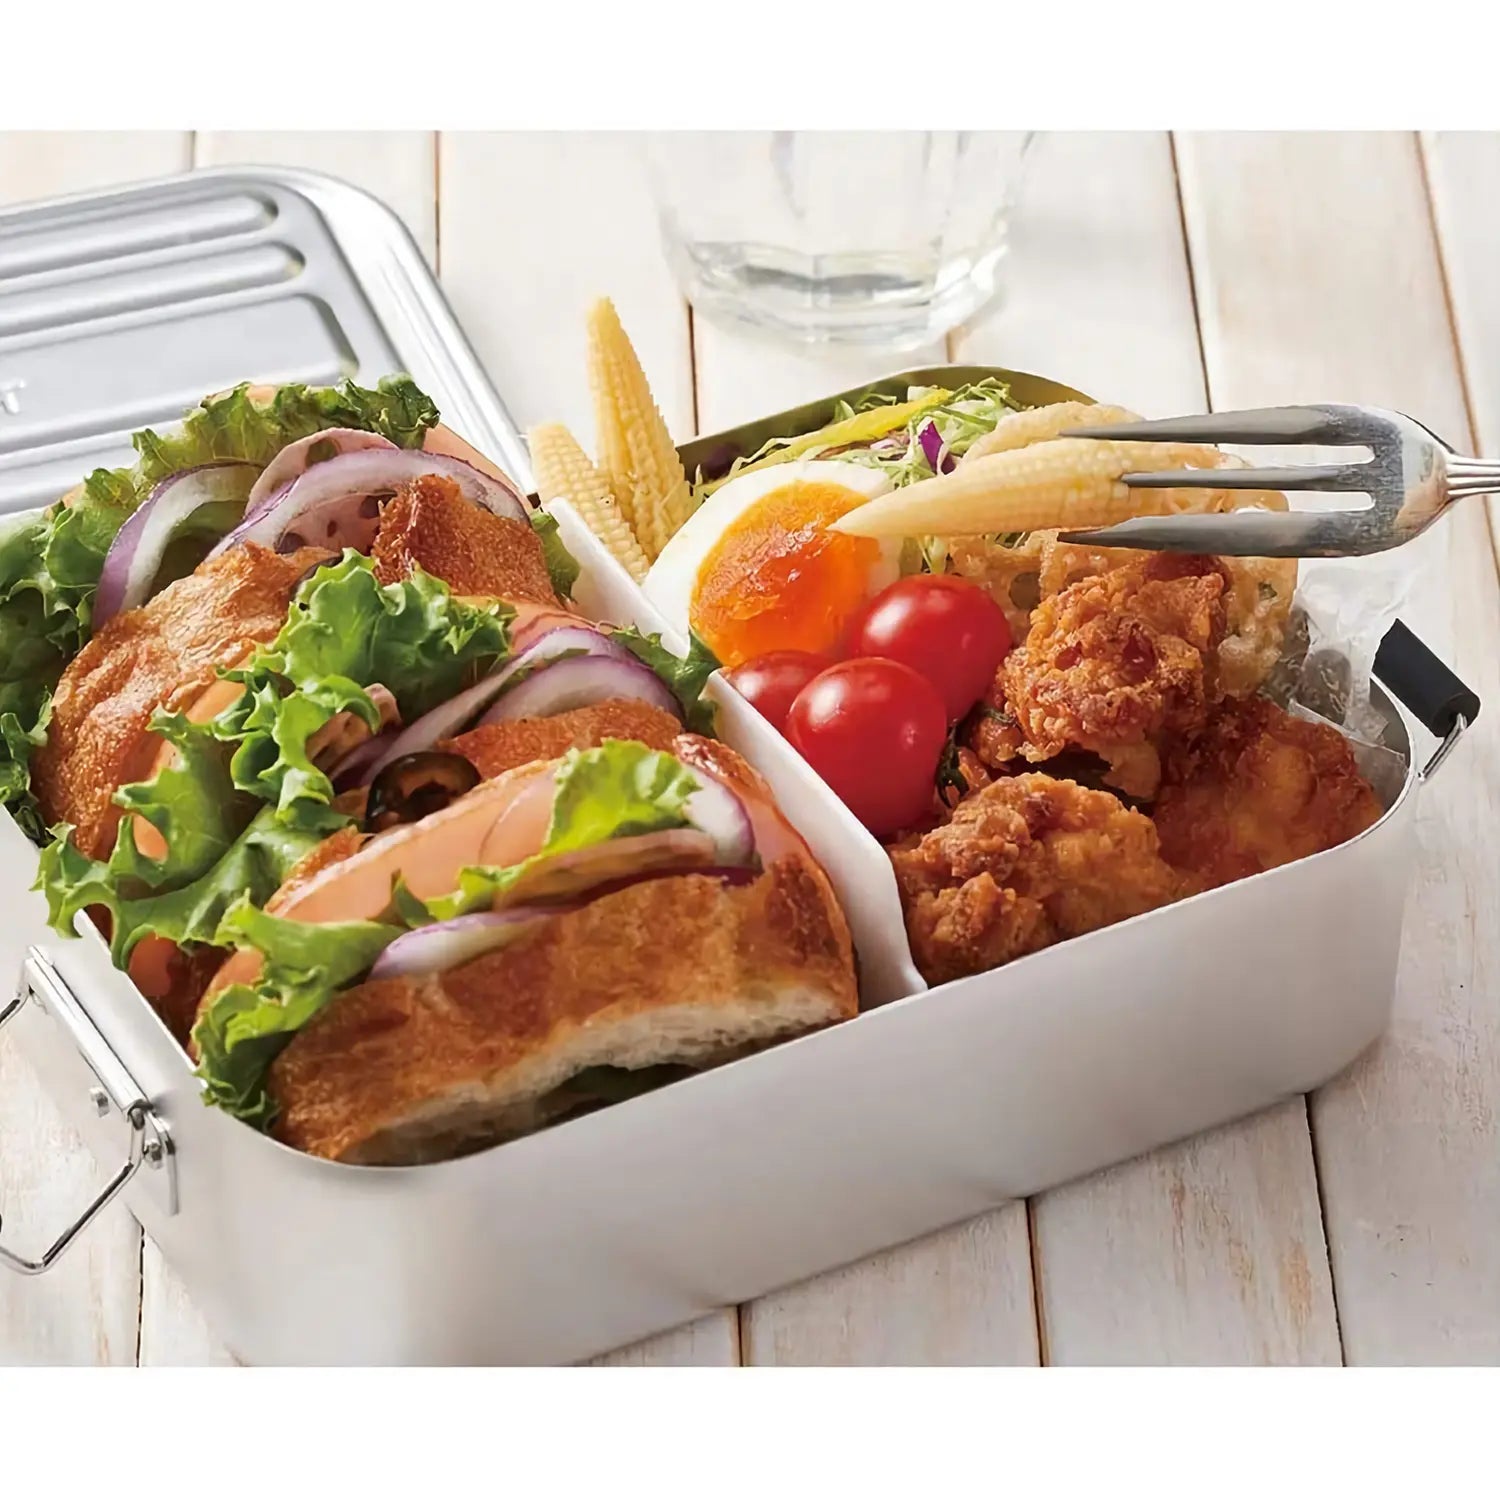 850ml Lunch Box Cute Salad Bowl Lunch Box Container High Capacity